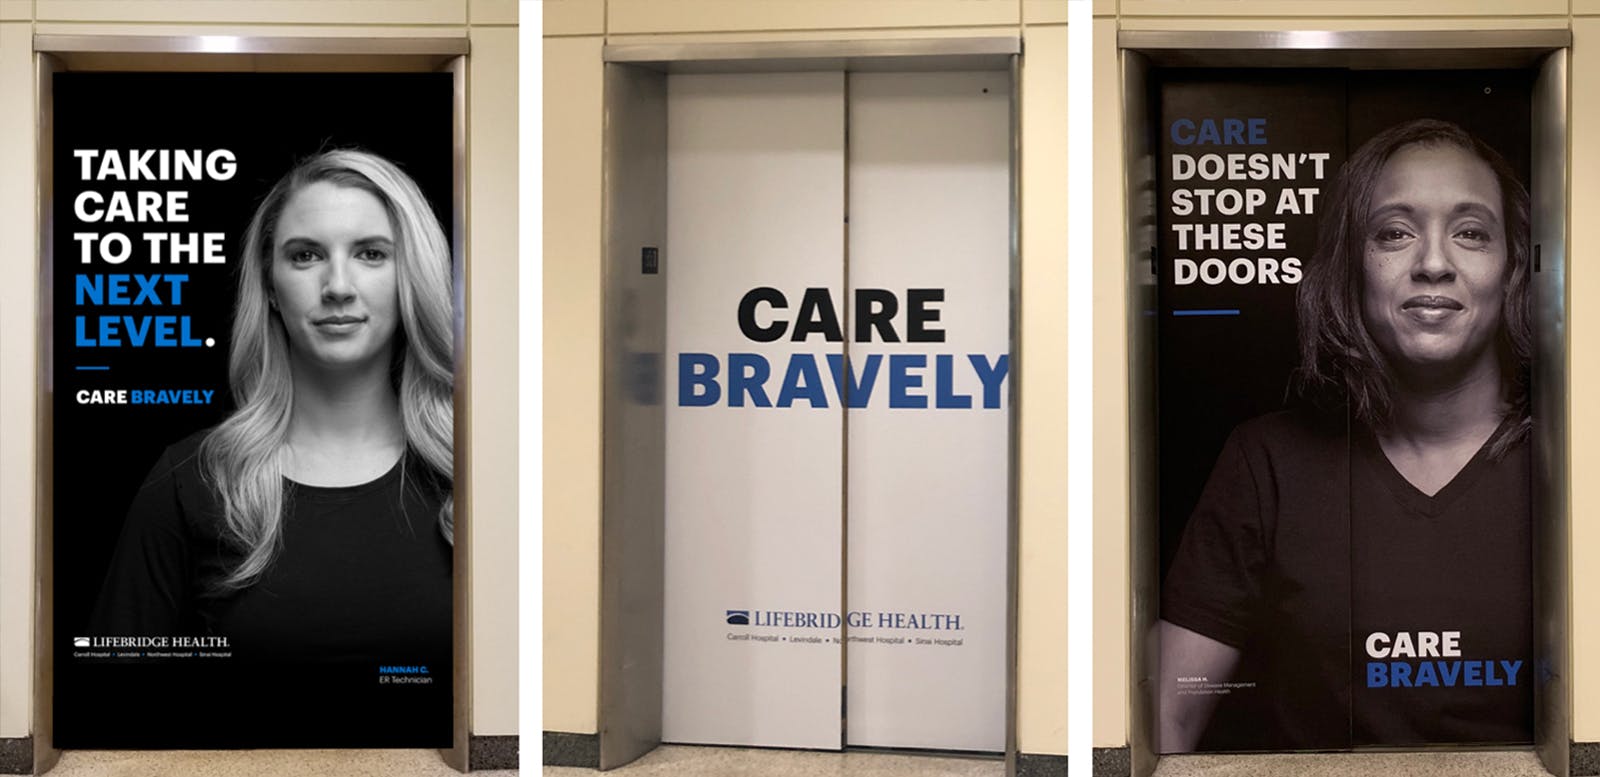 A collection of the physical graphic elements of the “Care Bravely” campaign.